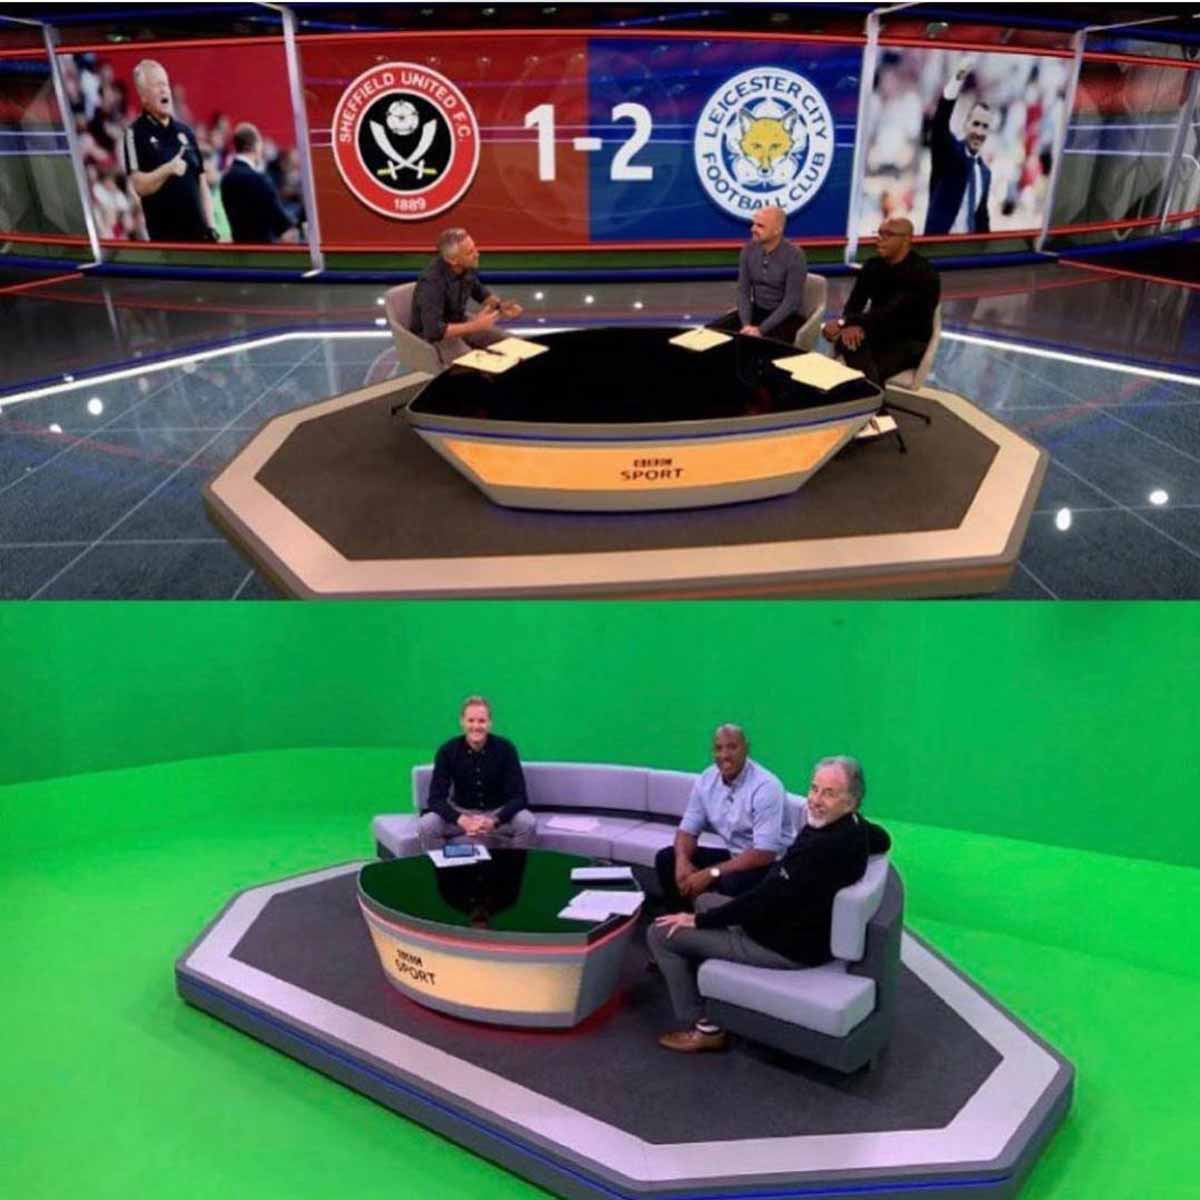 Funny picture of the studio of sports news show and then a picture showing it's all a greenscreen